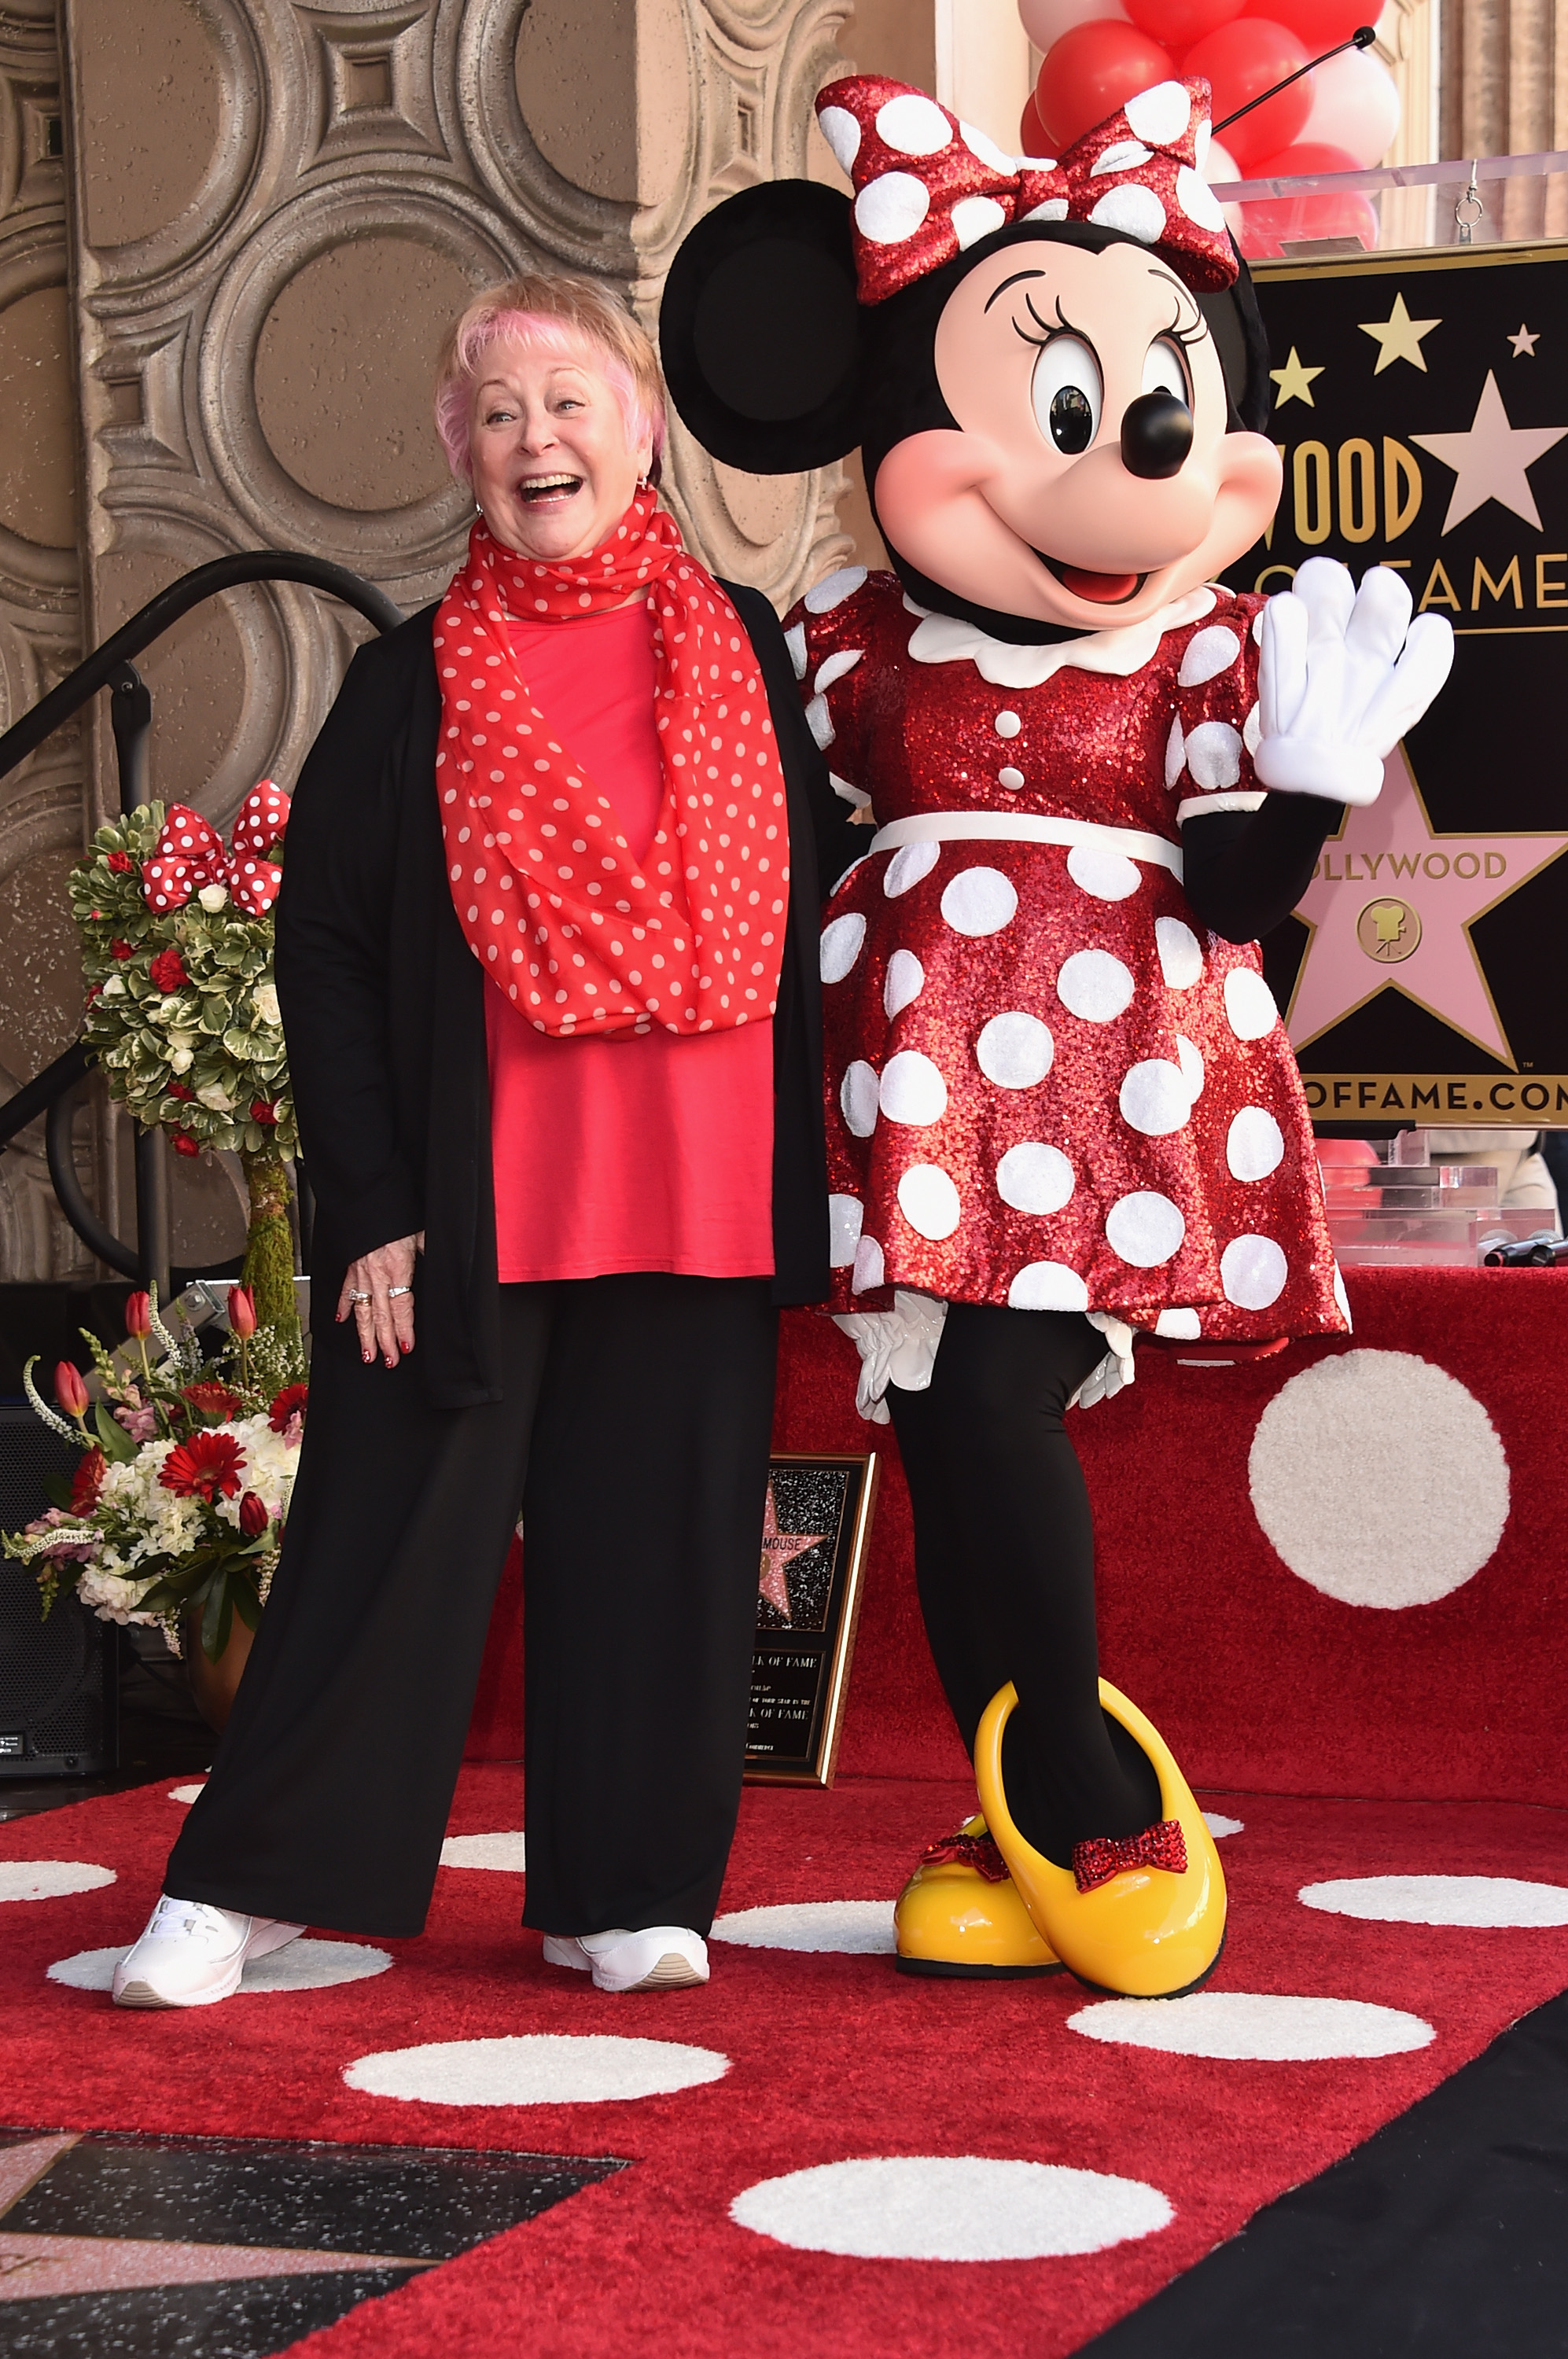 Flipboard: Russi Taylor, Voice of Minnie Mouse, Dies